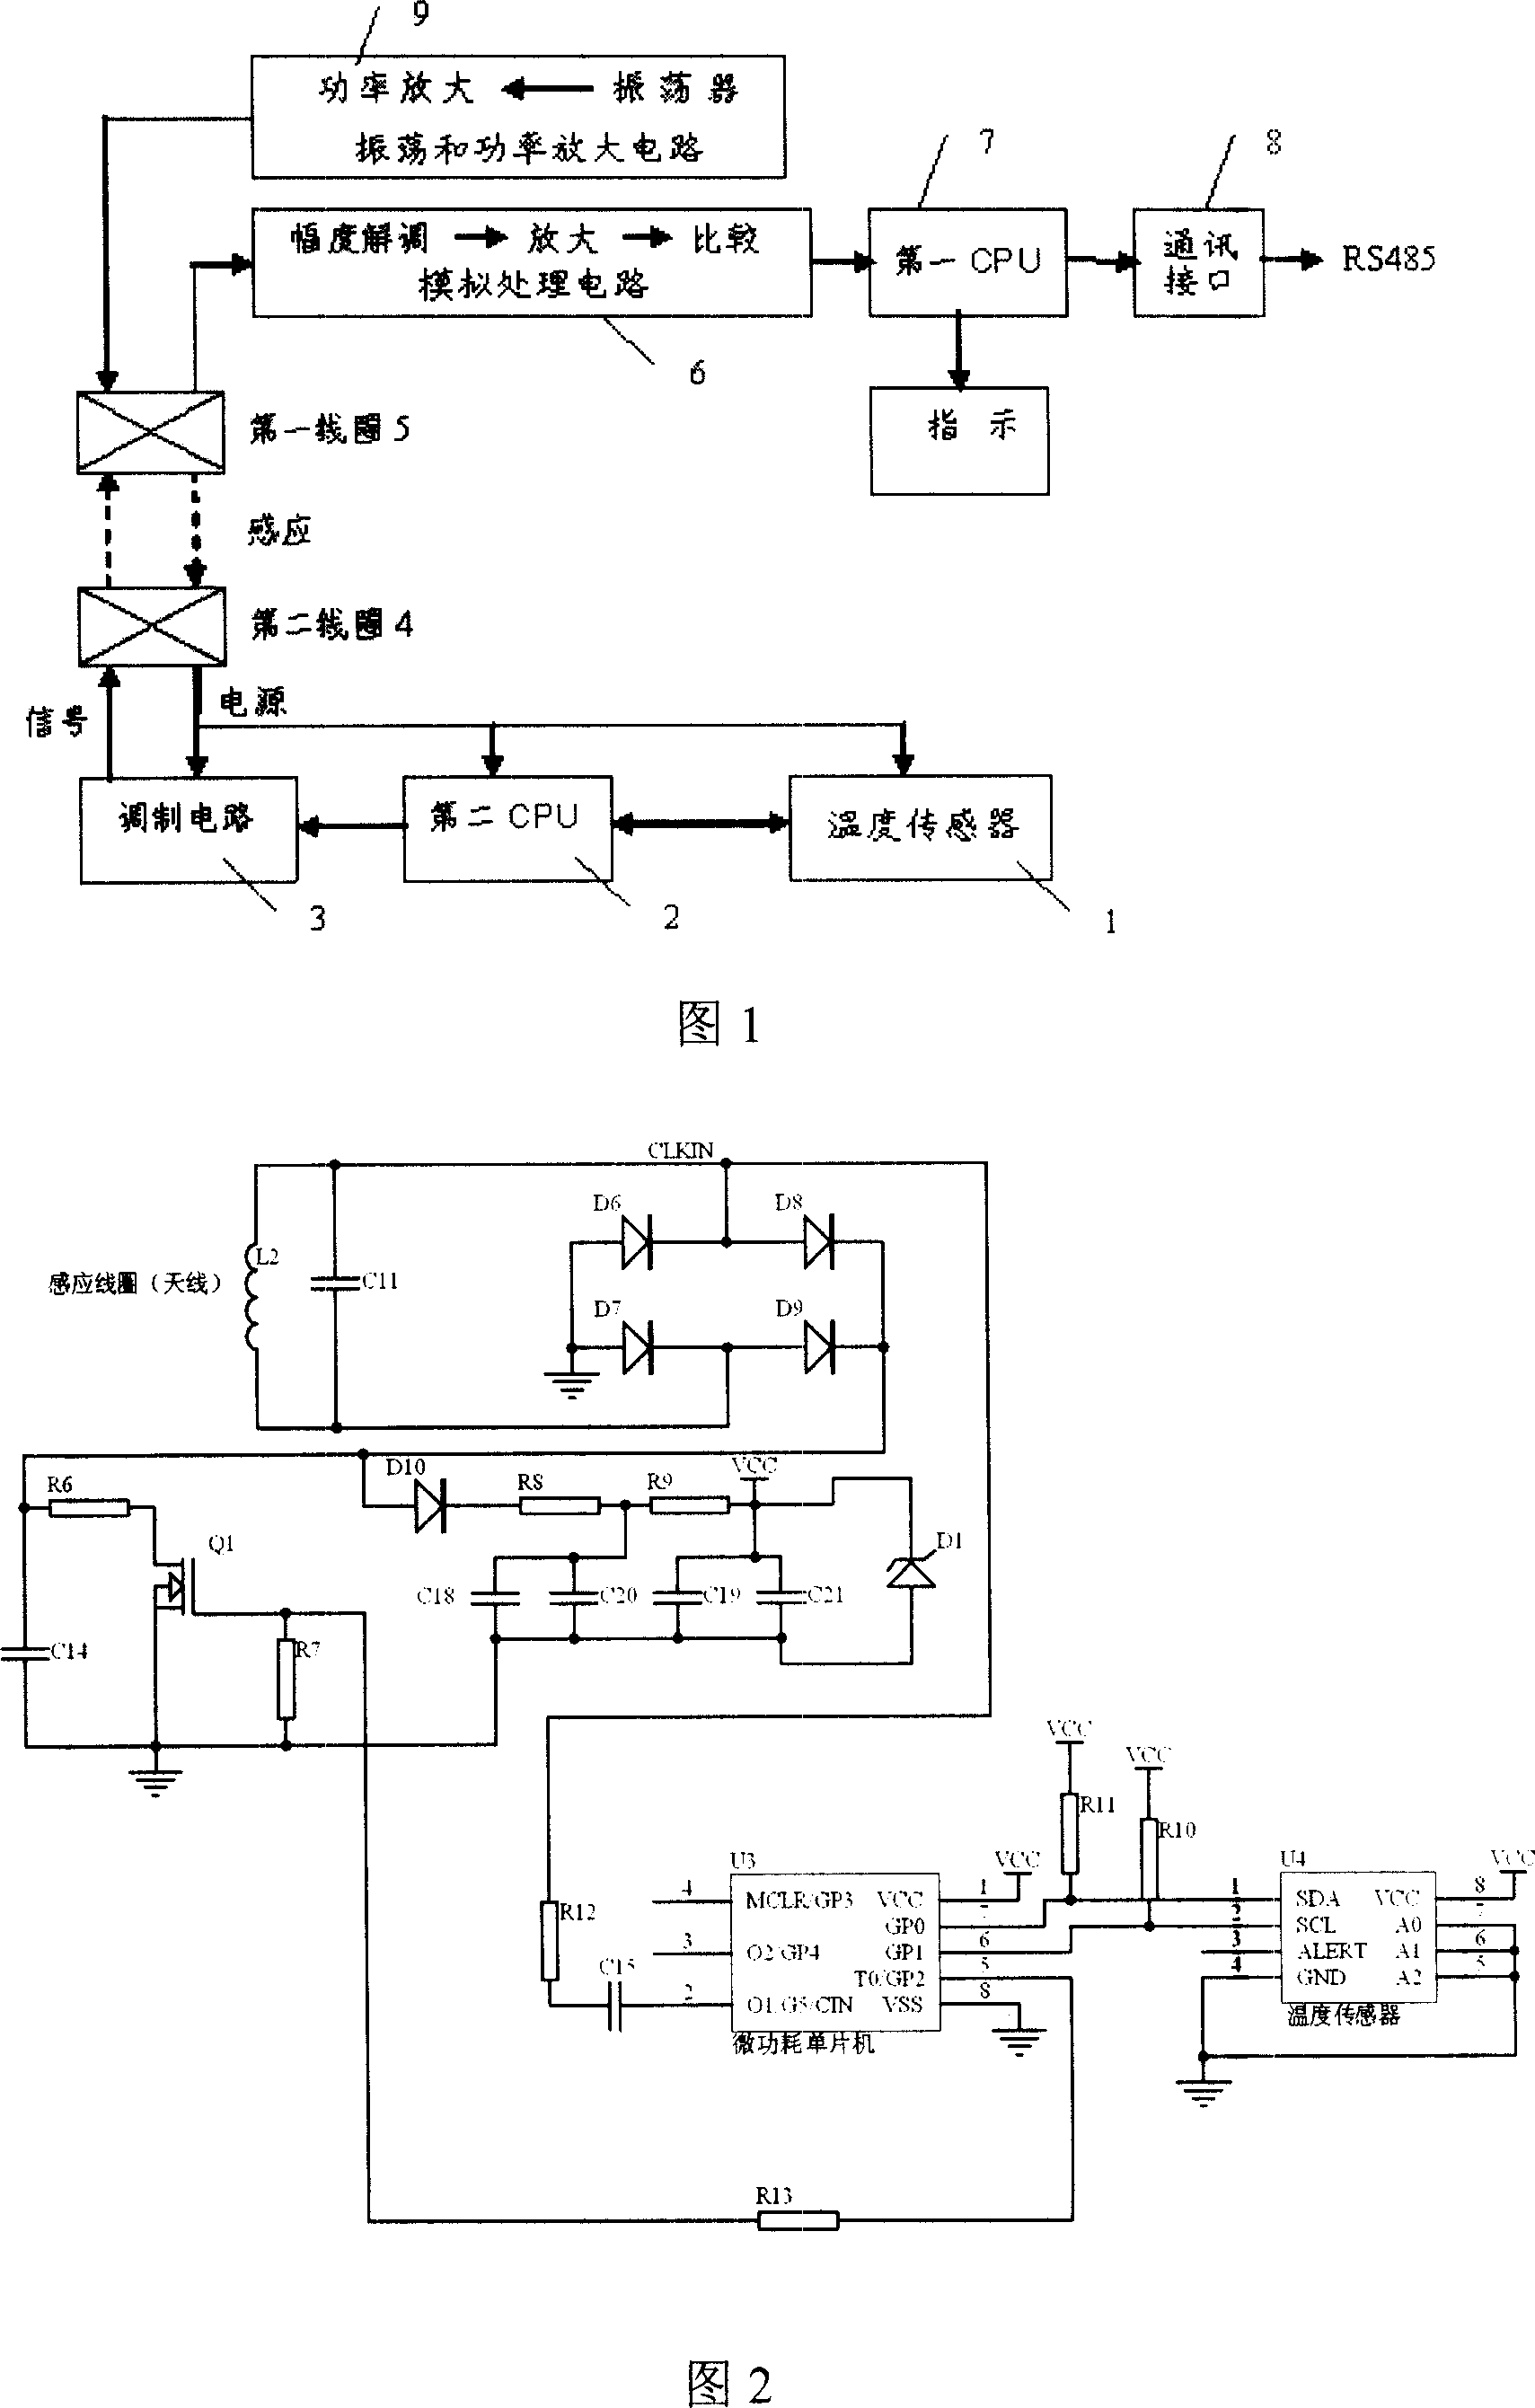 Concrete internal temperature detecting device based on induction princinple